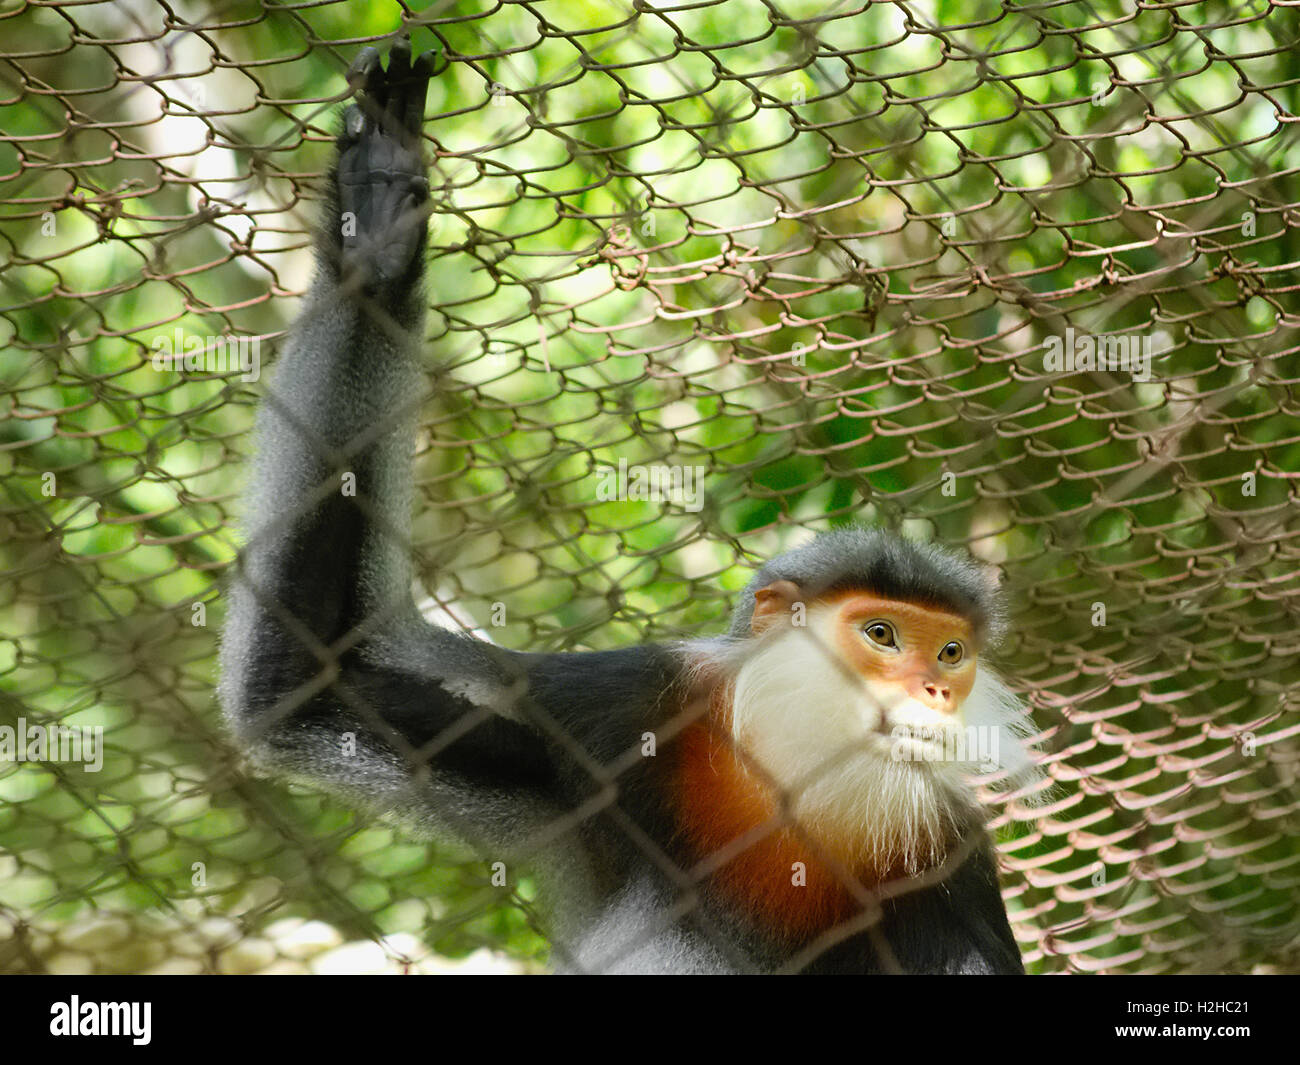 Captive red-shanked douc langur (Pygathrix nemaeus) in a cage at the endangered primate rescue center in Cuc Phuong, Vietnam Stock Photo